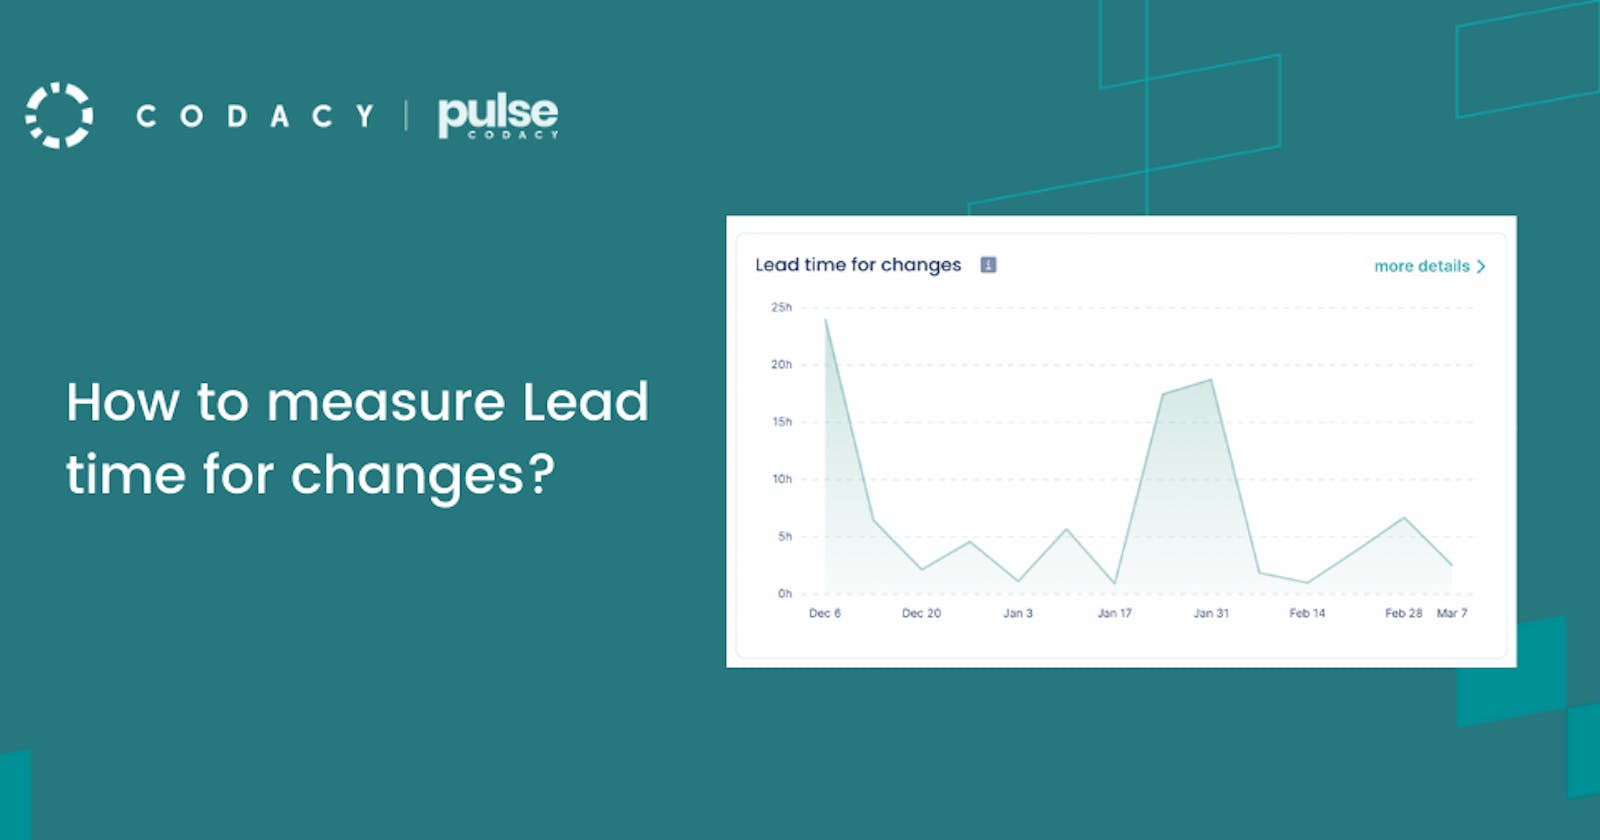 How to measure Lead time for changes?